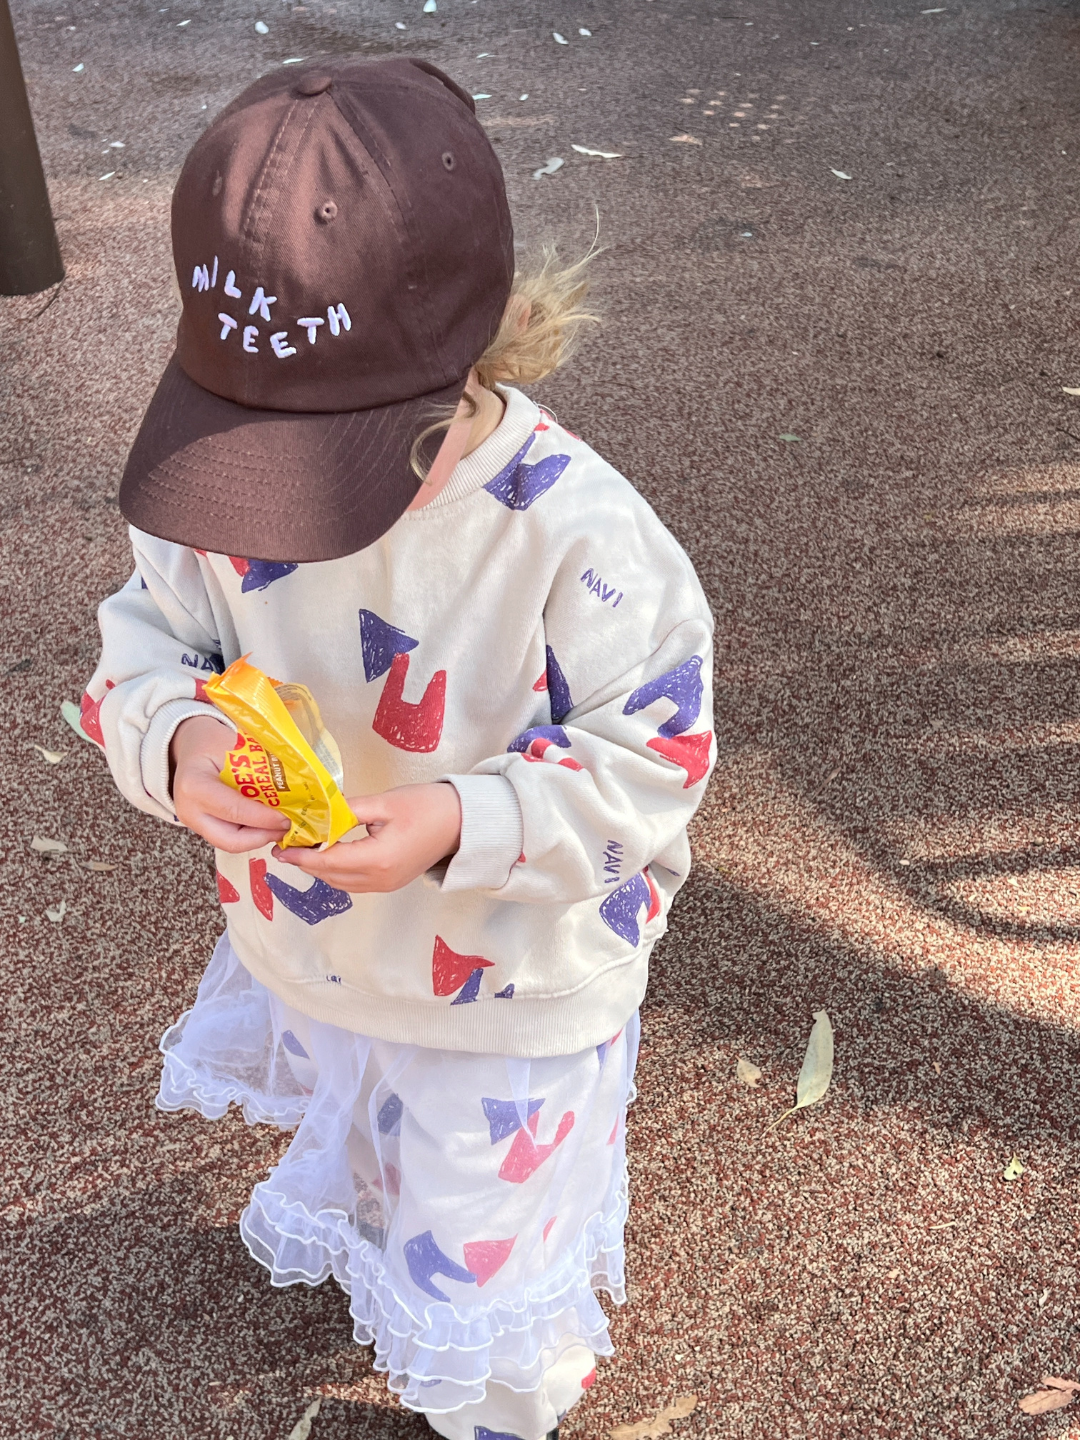 Brown | Child wearing the Milk Teeth baseball cap in brown pink with pale purple Milk Teeth lettering, outdoors at a park with a brown floor. They are wearing a cream sweatshirt printed with purple and red shapes, a white tutu skirt, and eating a snack bar in a yellow wrapper.